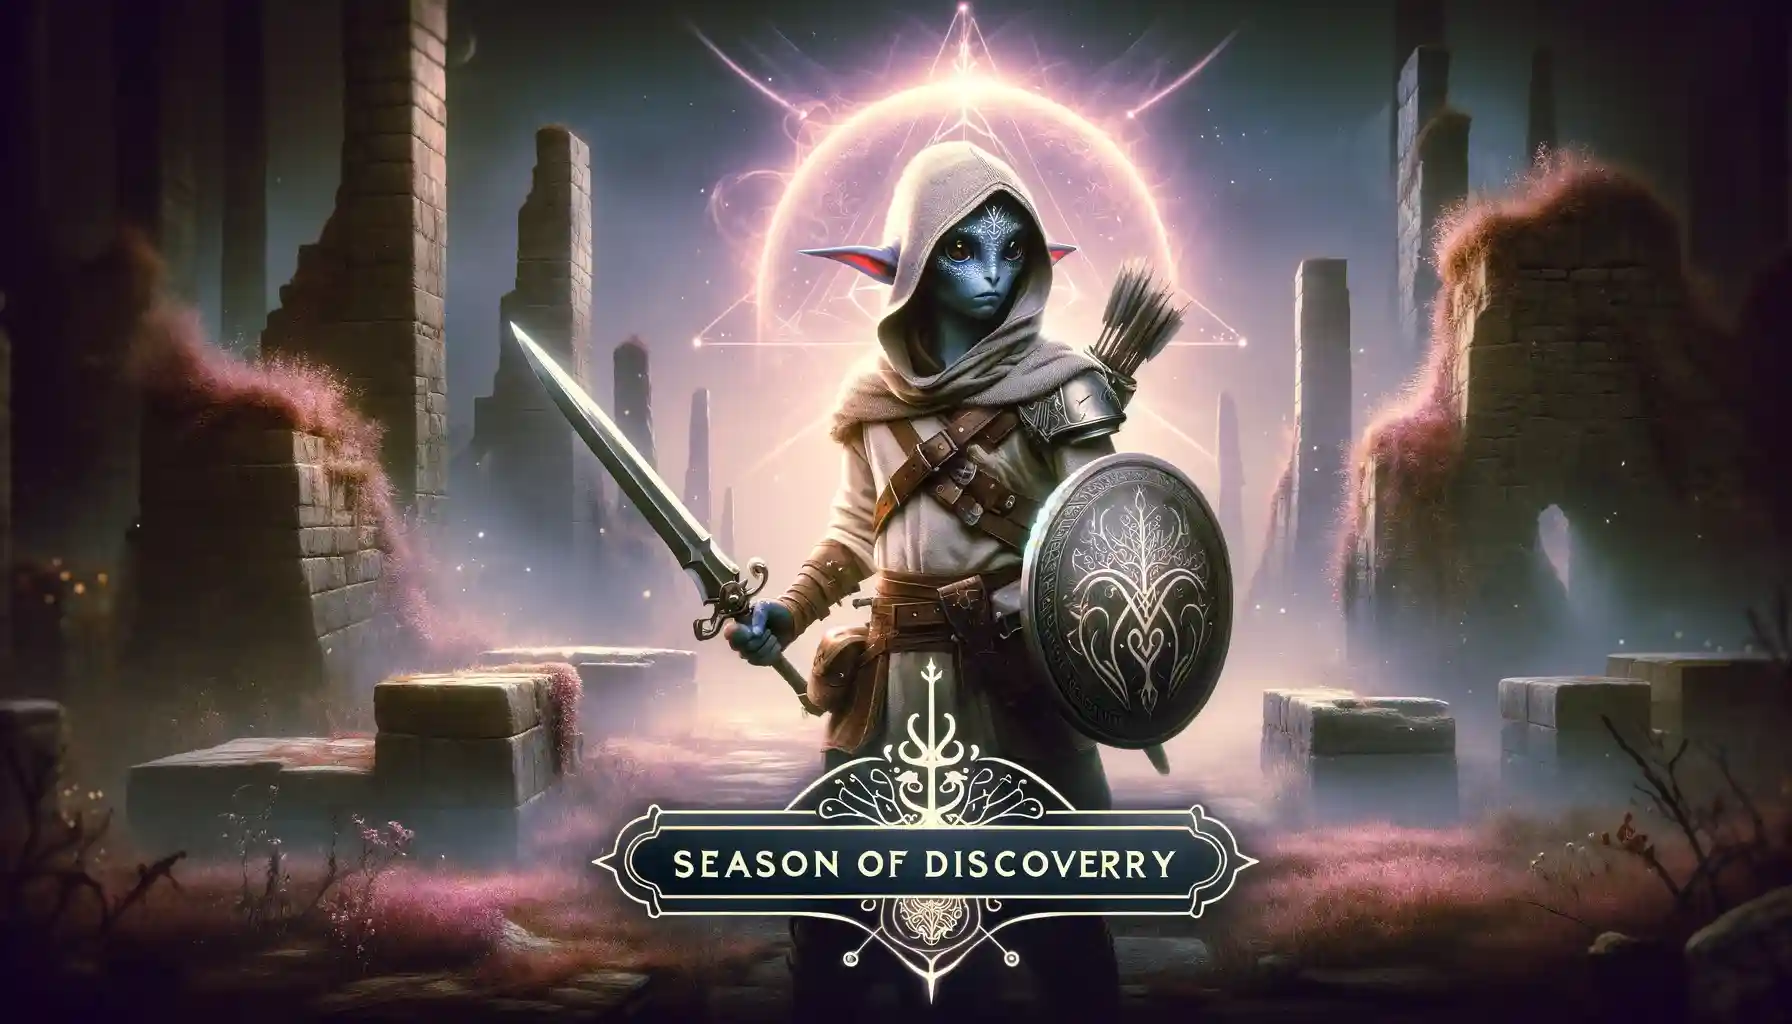 WoW Season of Discovery Beginners Guide | Tricks in Phase 1